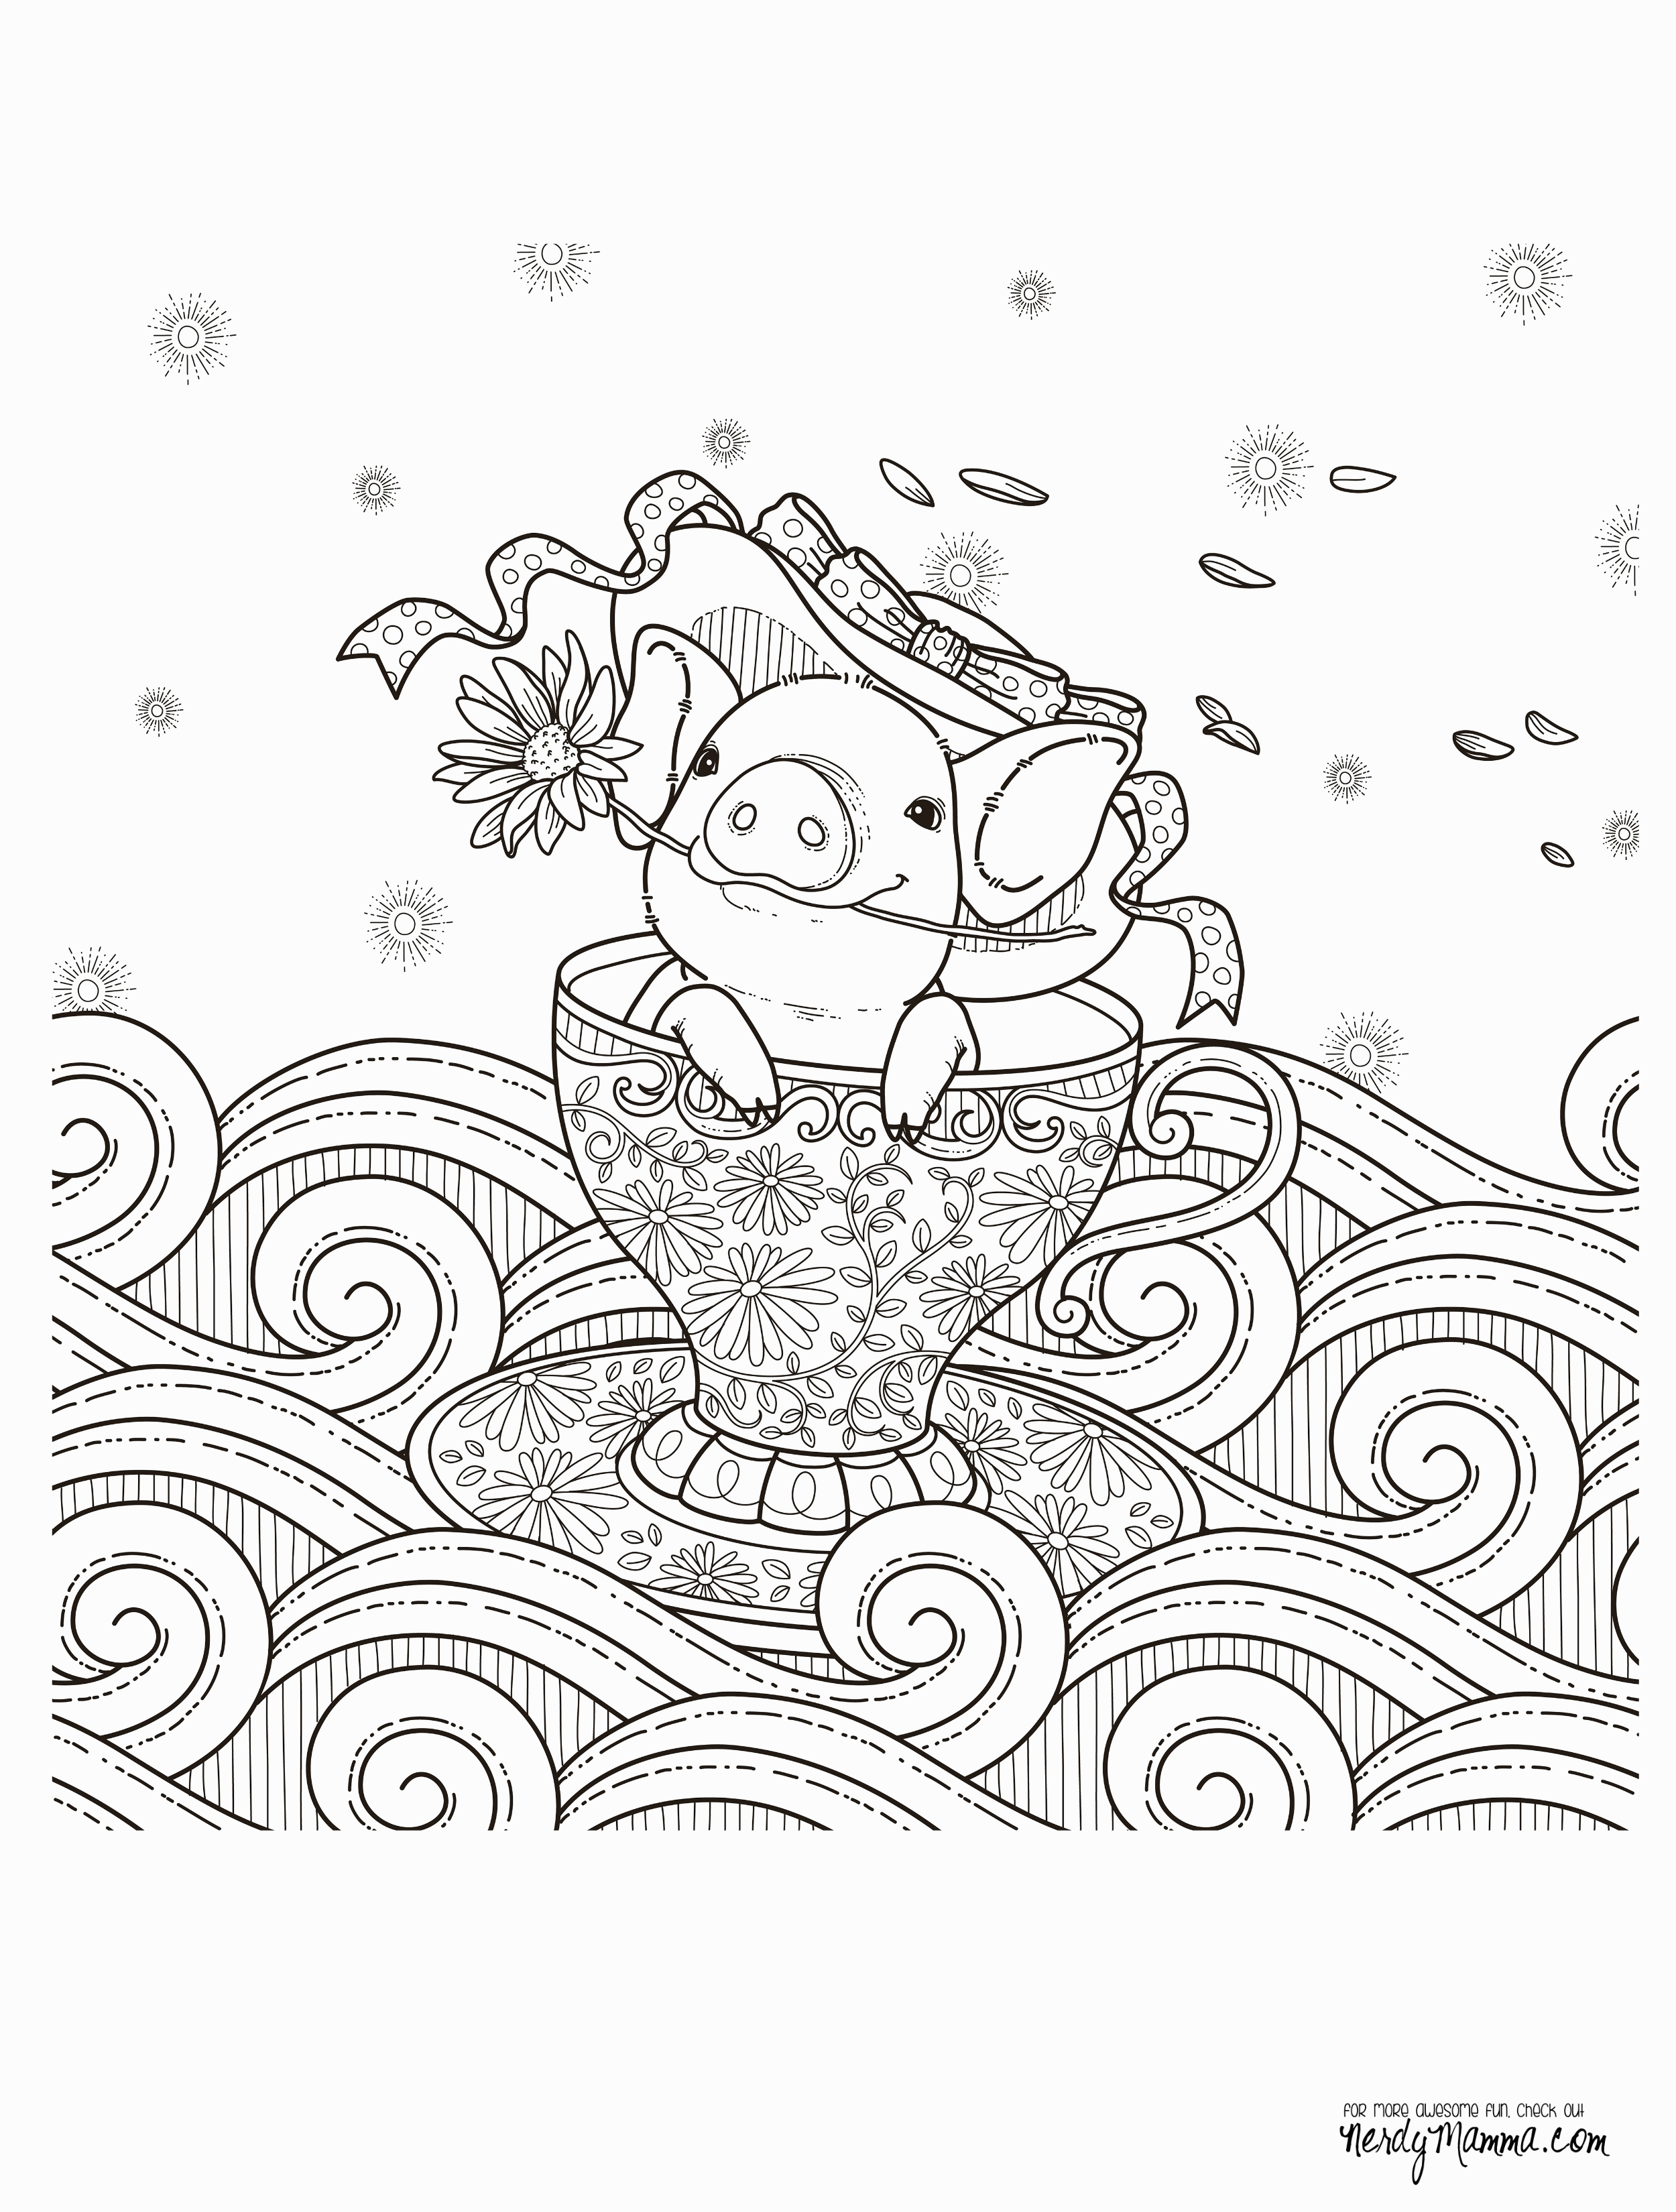 11 Free Printable Adult Coloring Pages